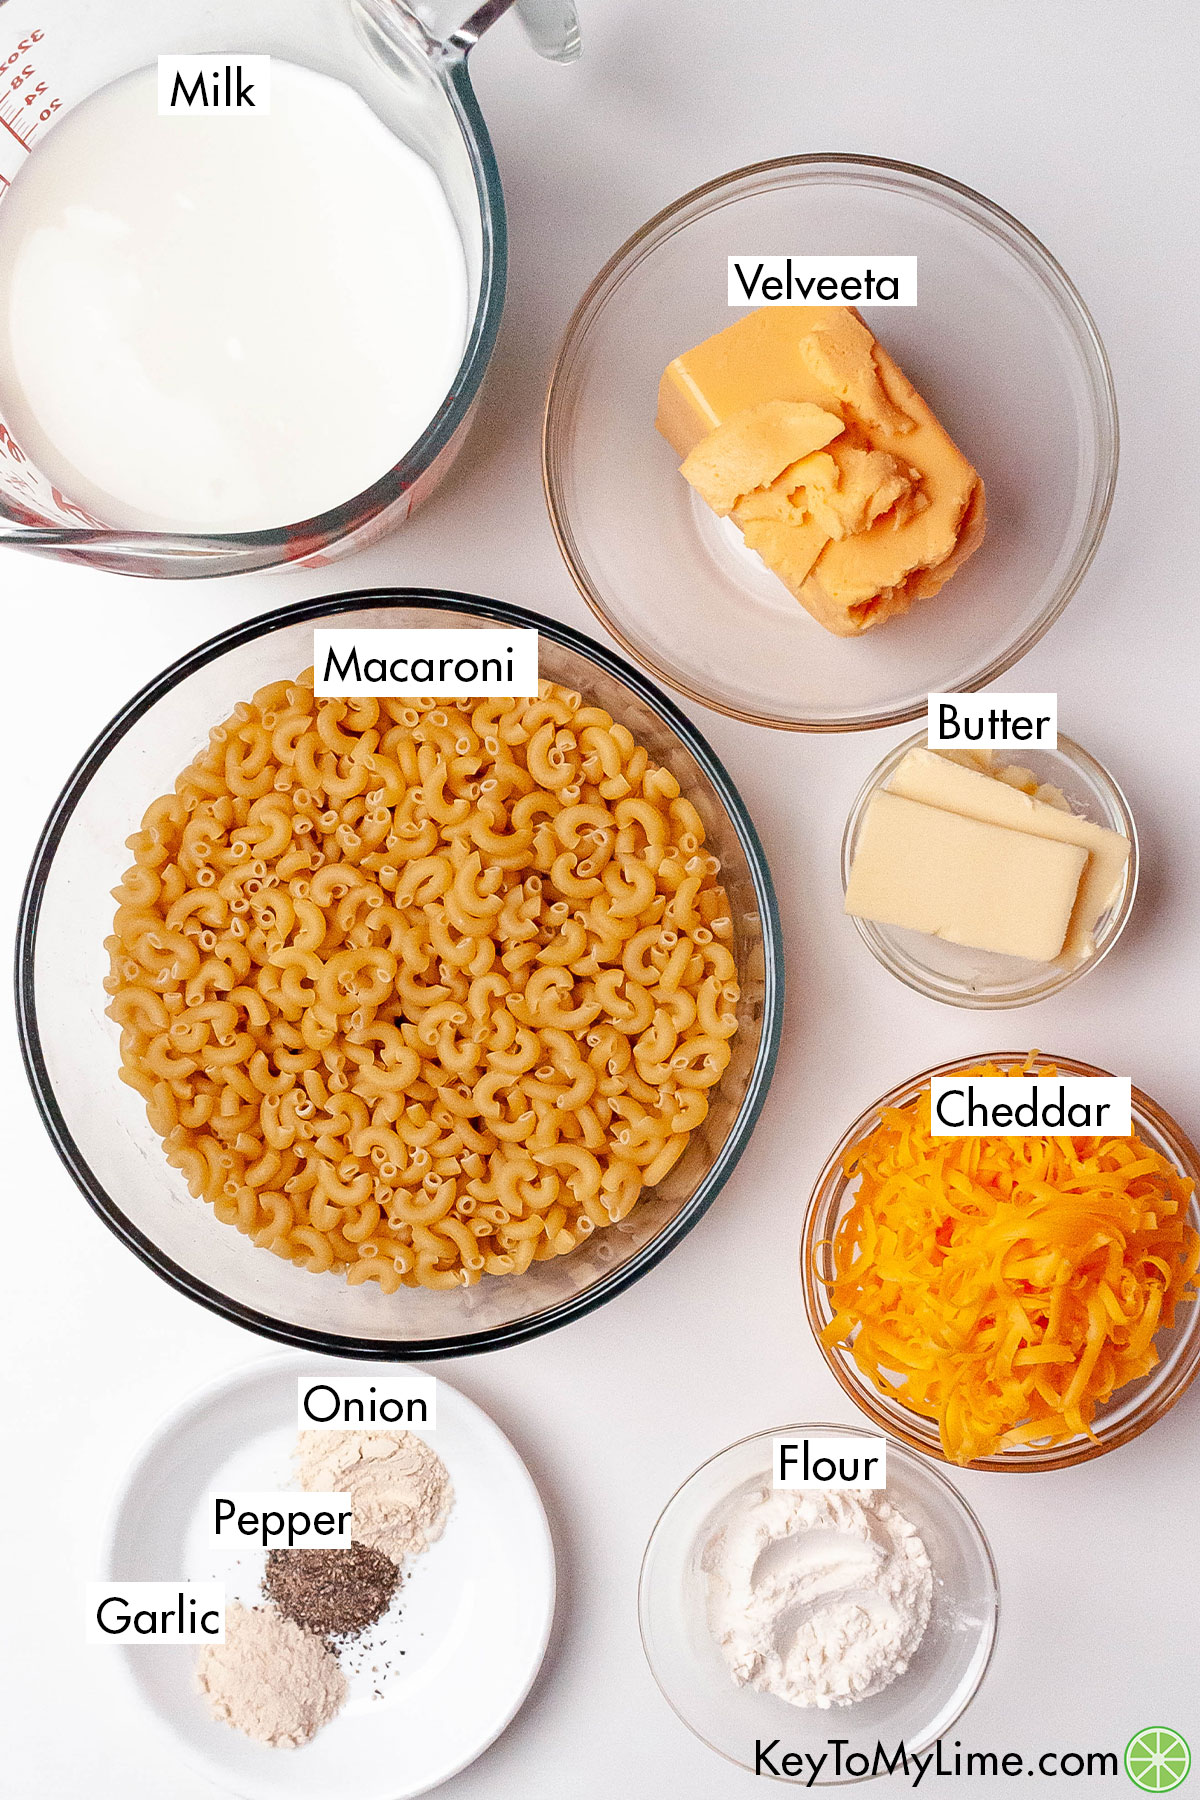 The labeled ingredients for baked mac and cheese with Velveeta.